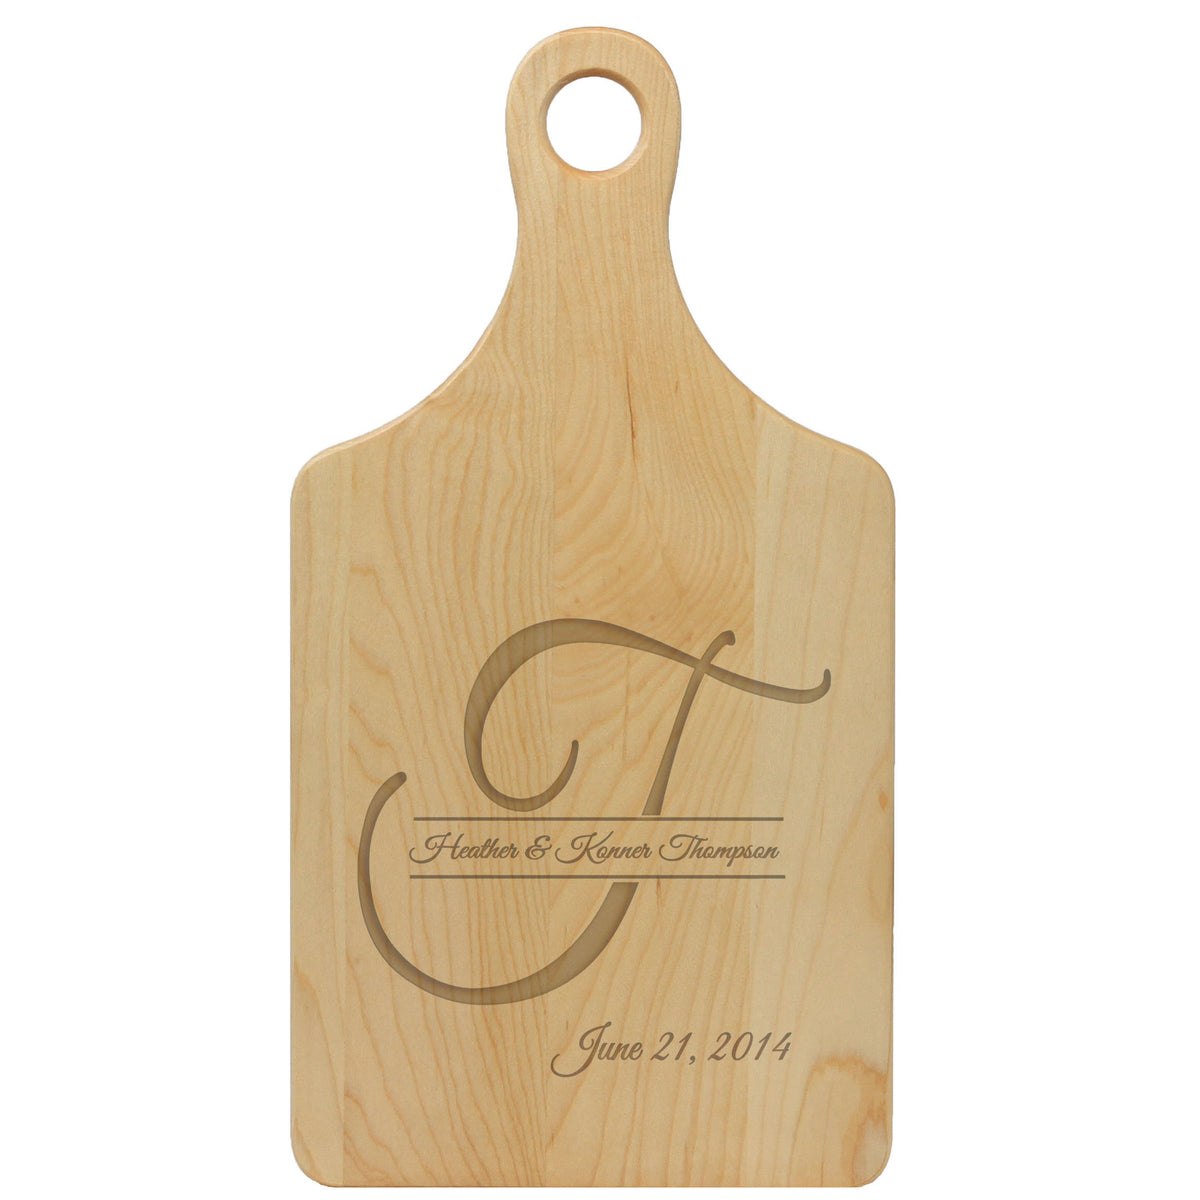 WY – Wood Paddle Shaped Cutting Board – Wyoming engraved